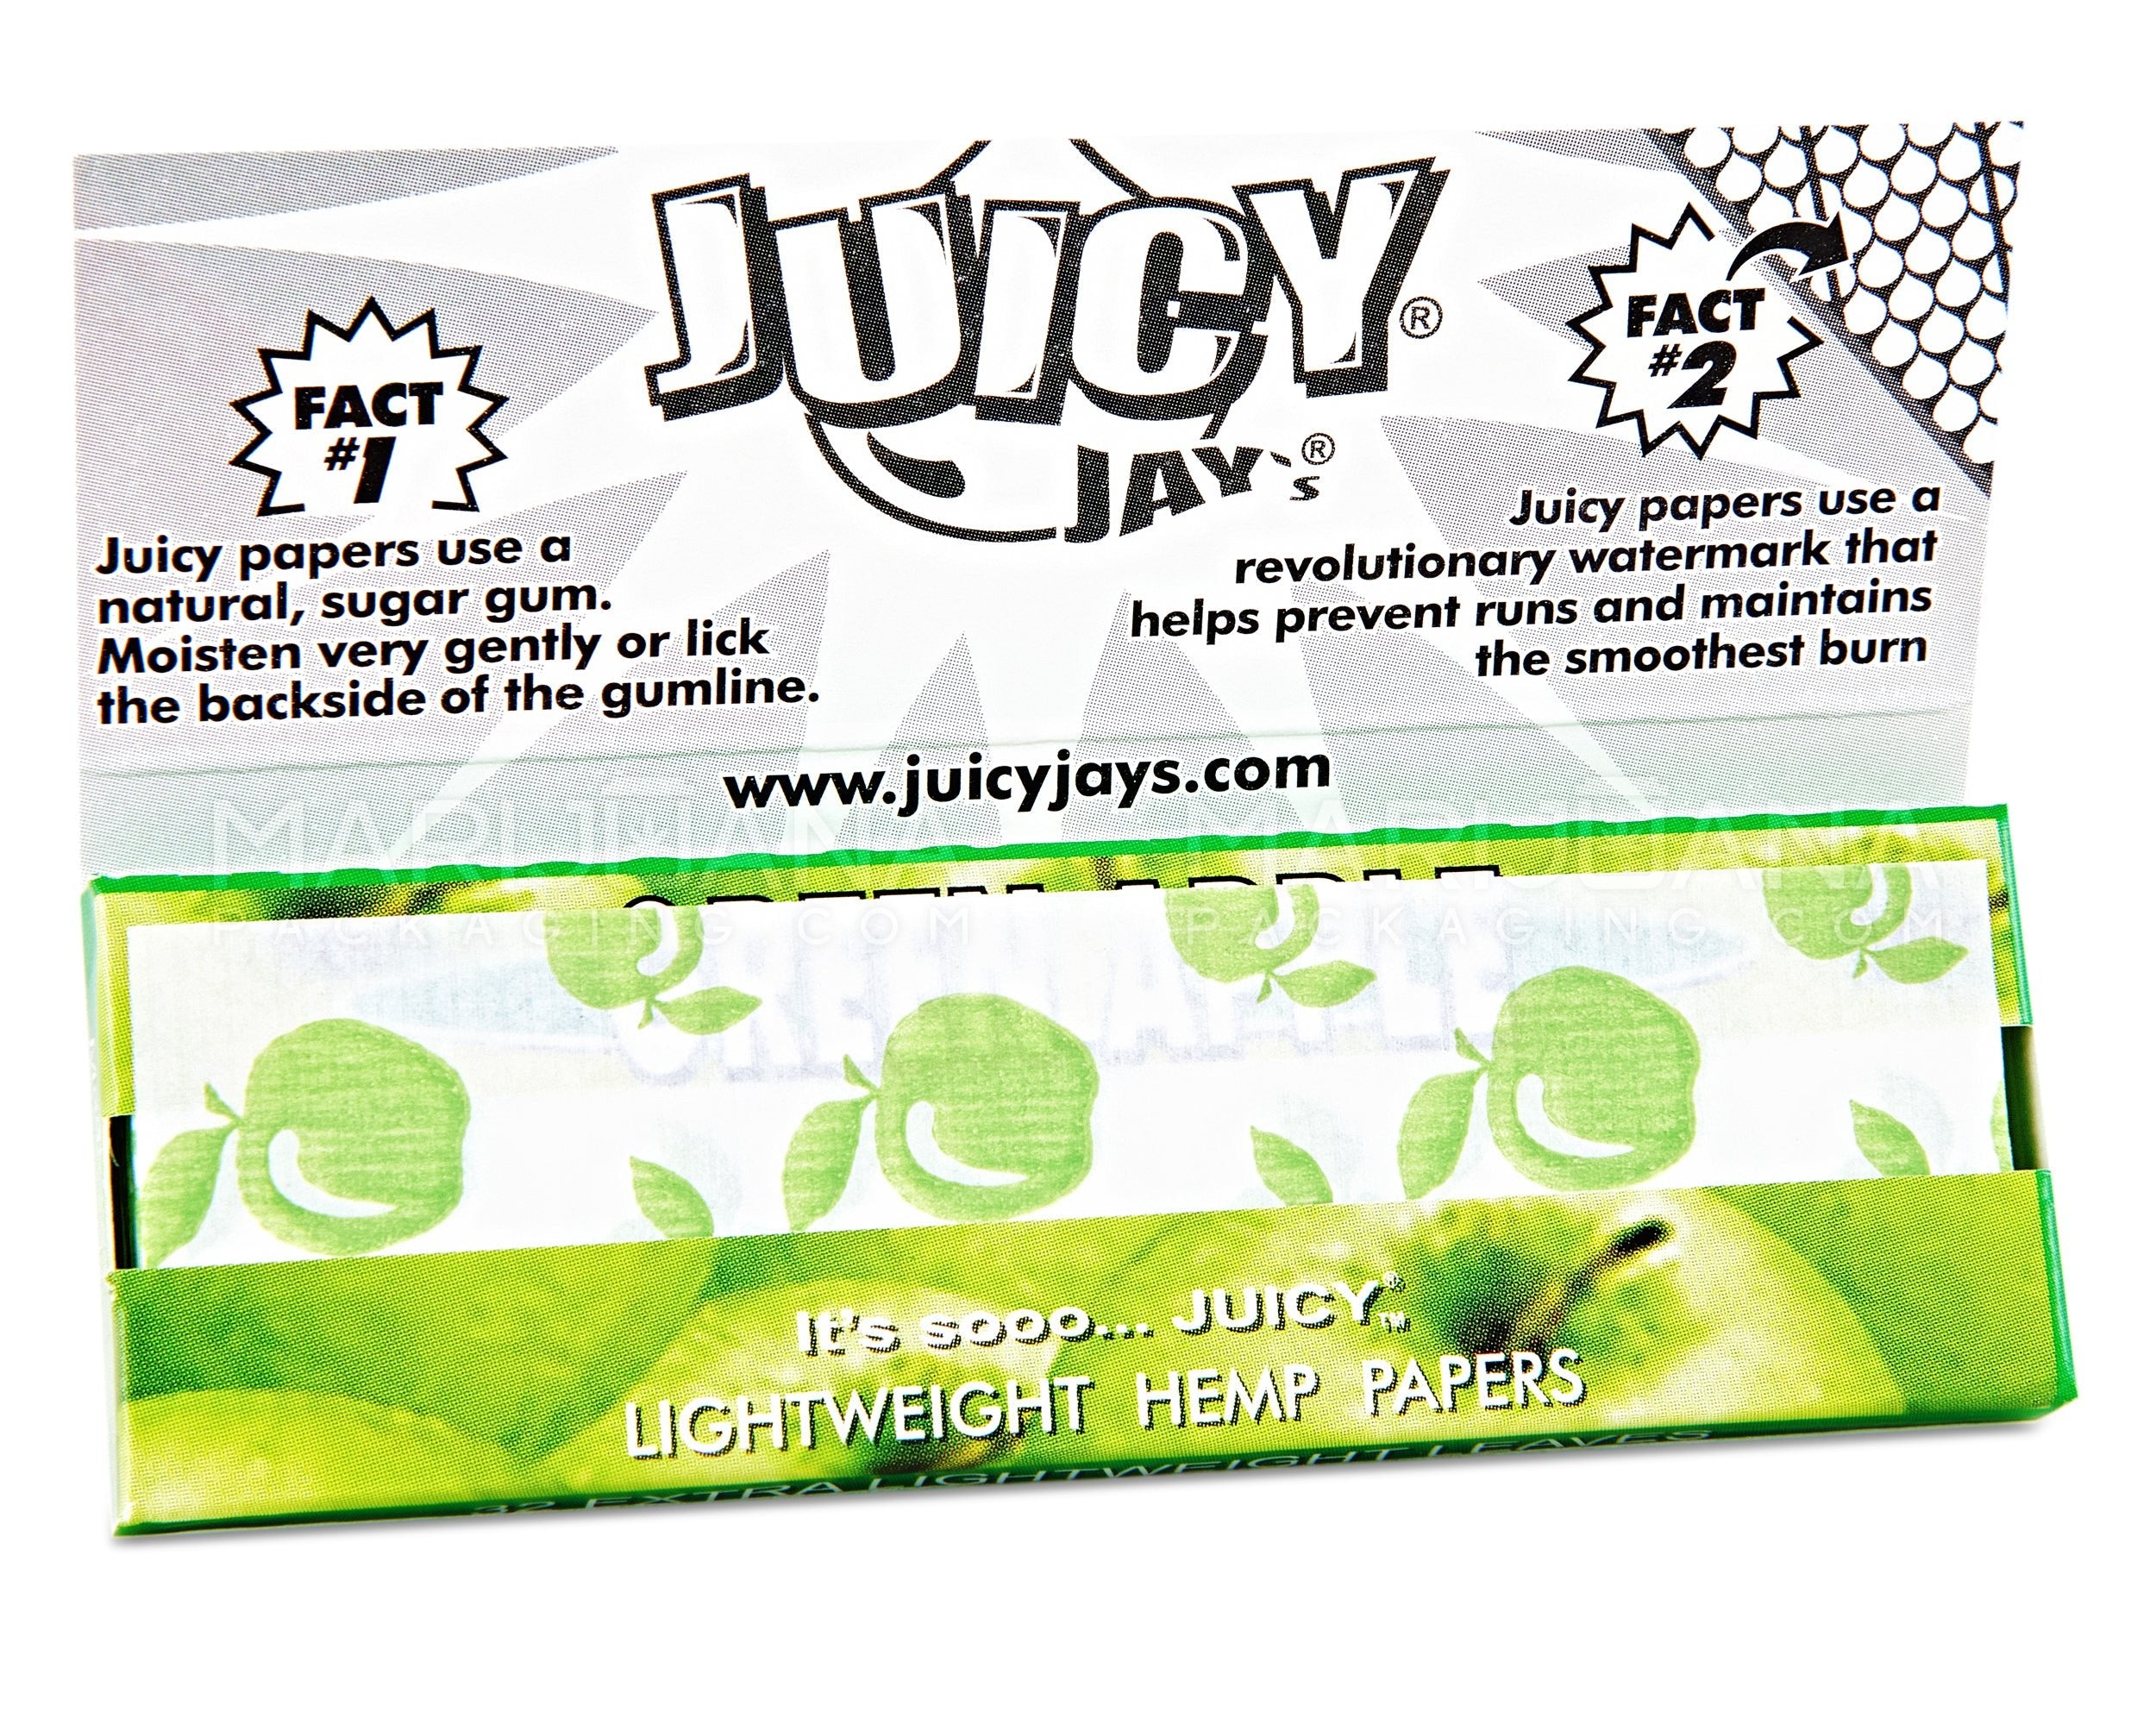 JUICY JAY'S | 'Retail Display' 1 1/4 Size Hemp Rolling Papers | 76mm - Green Apple - 24 Count - 3